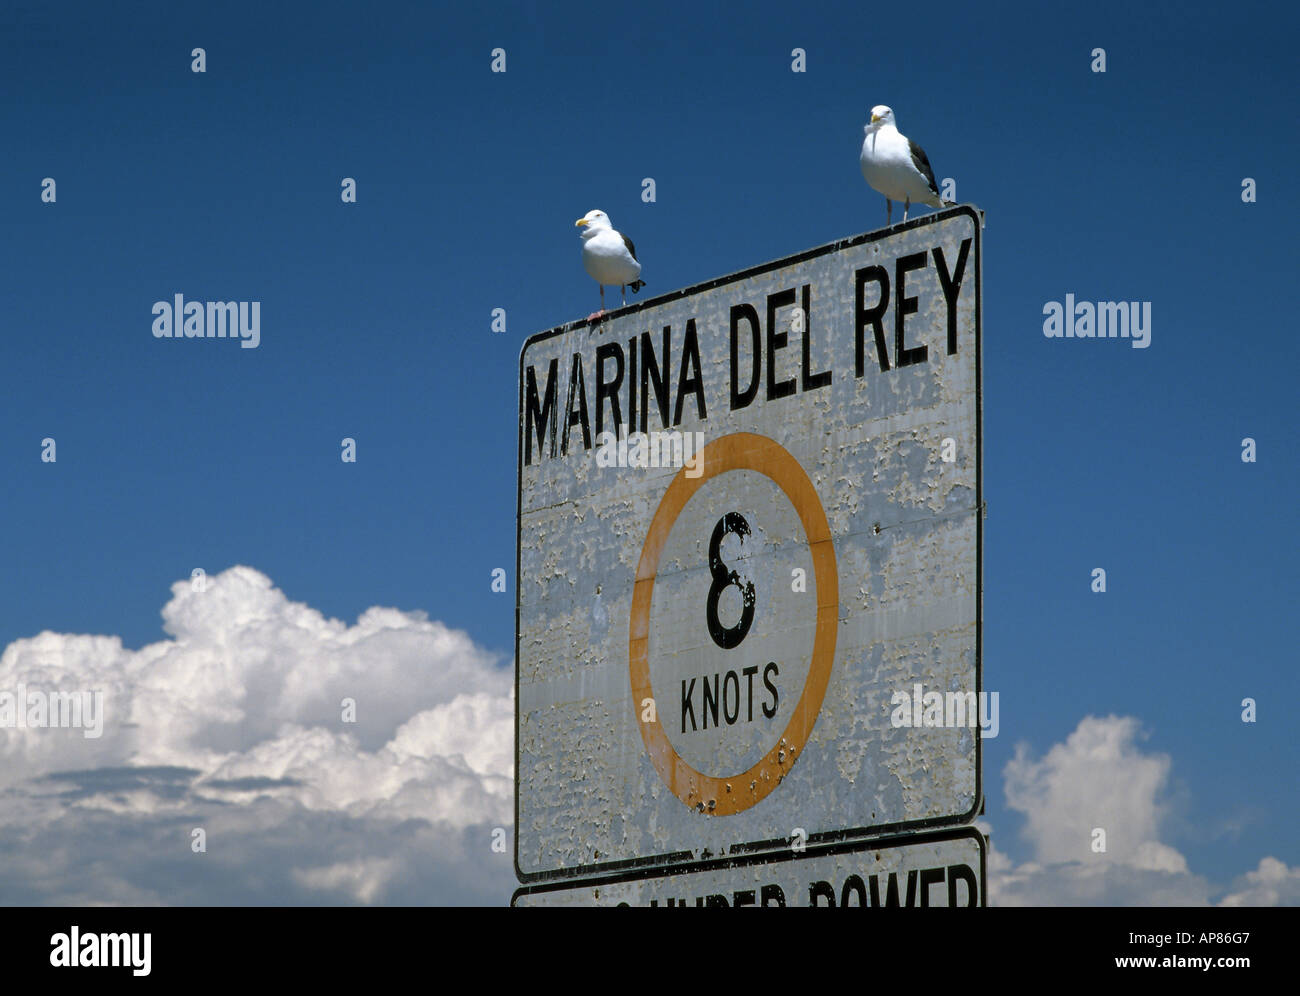 Two sassy gulls taking a rest on top of speed limit sign at entrance of main channel in Marina del Rey, Southern California Stock Photo